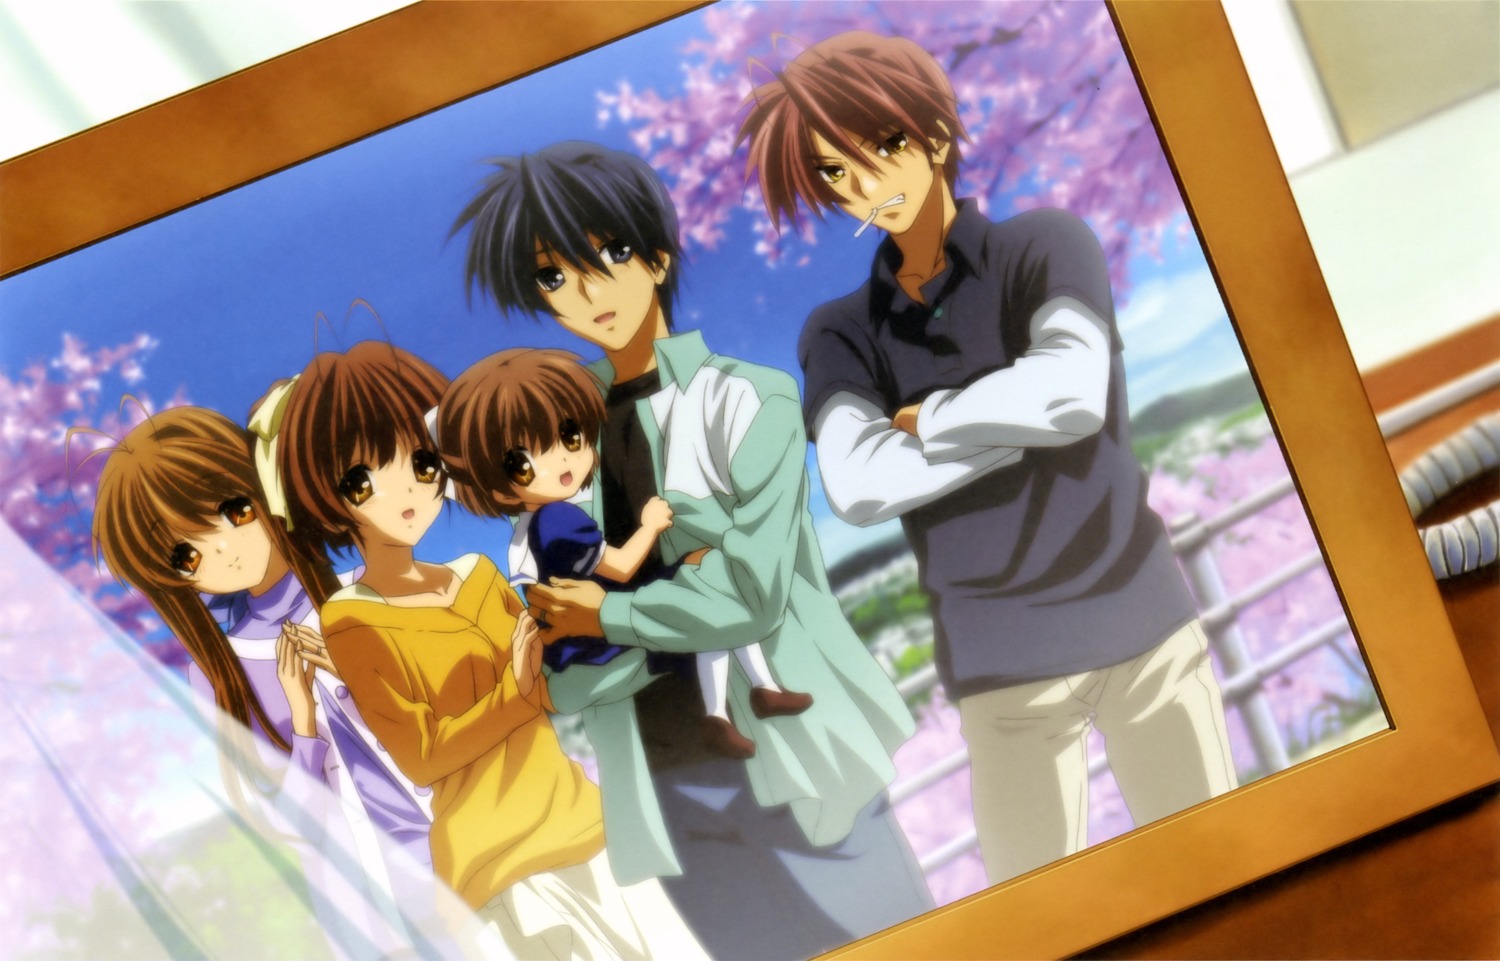 Animes In Japan 🎄 on X: 😭💔 Anime: Clannad after story. https